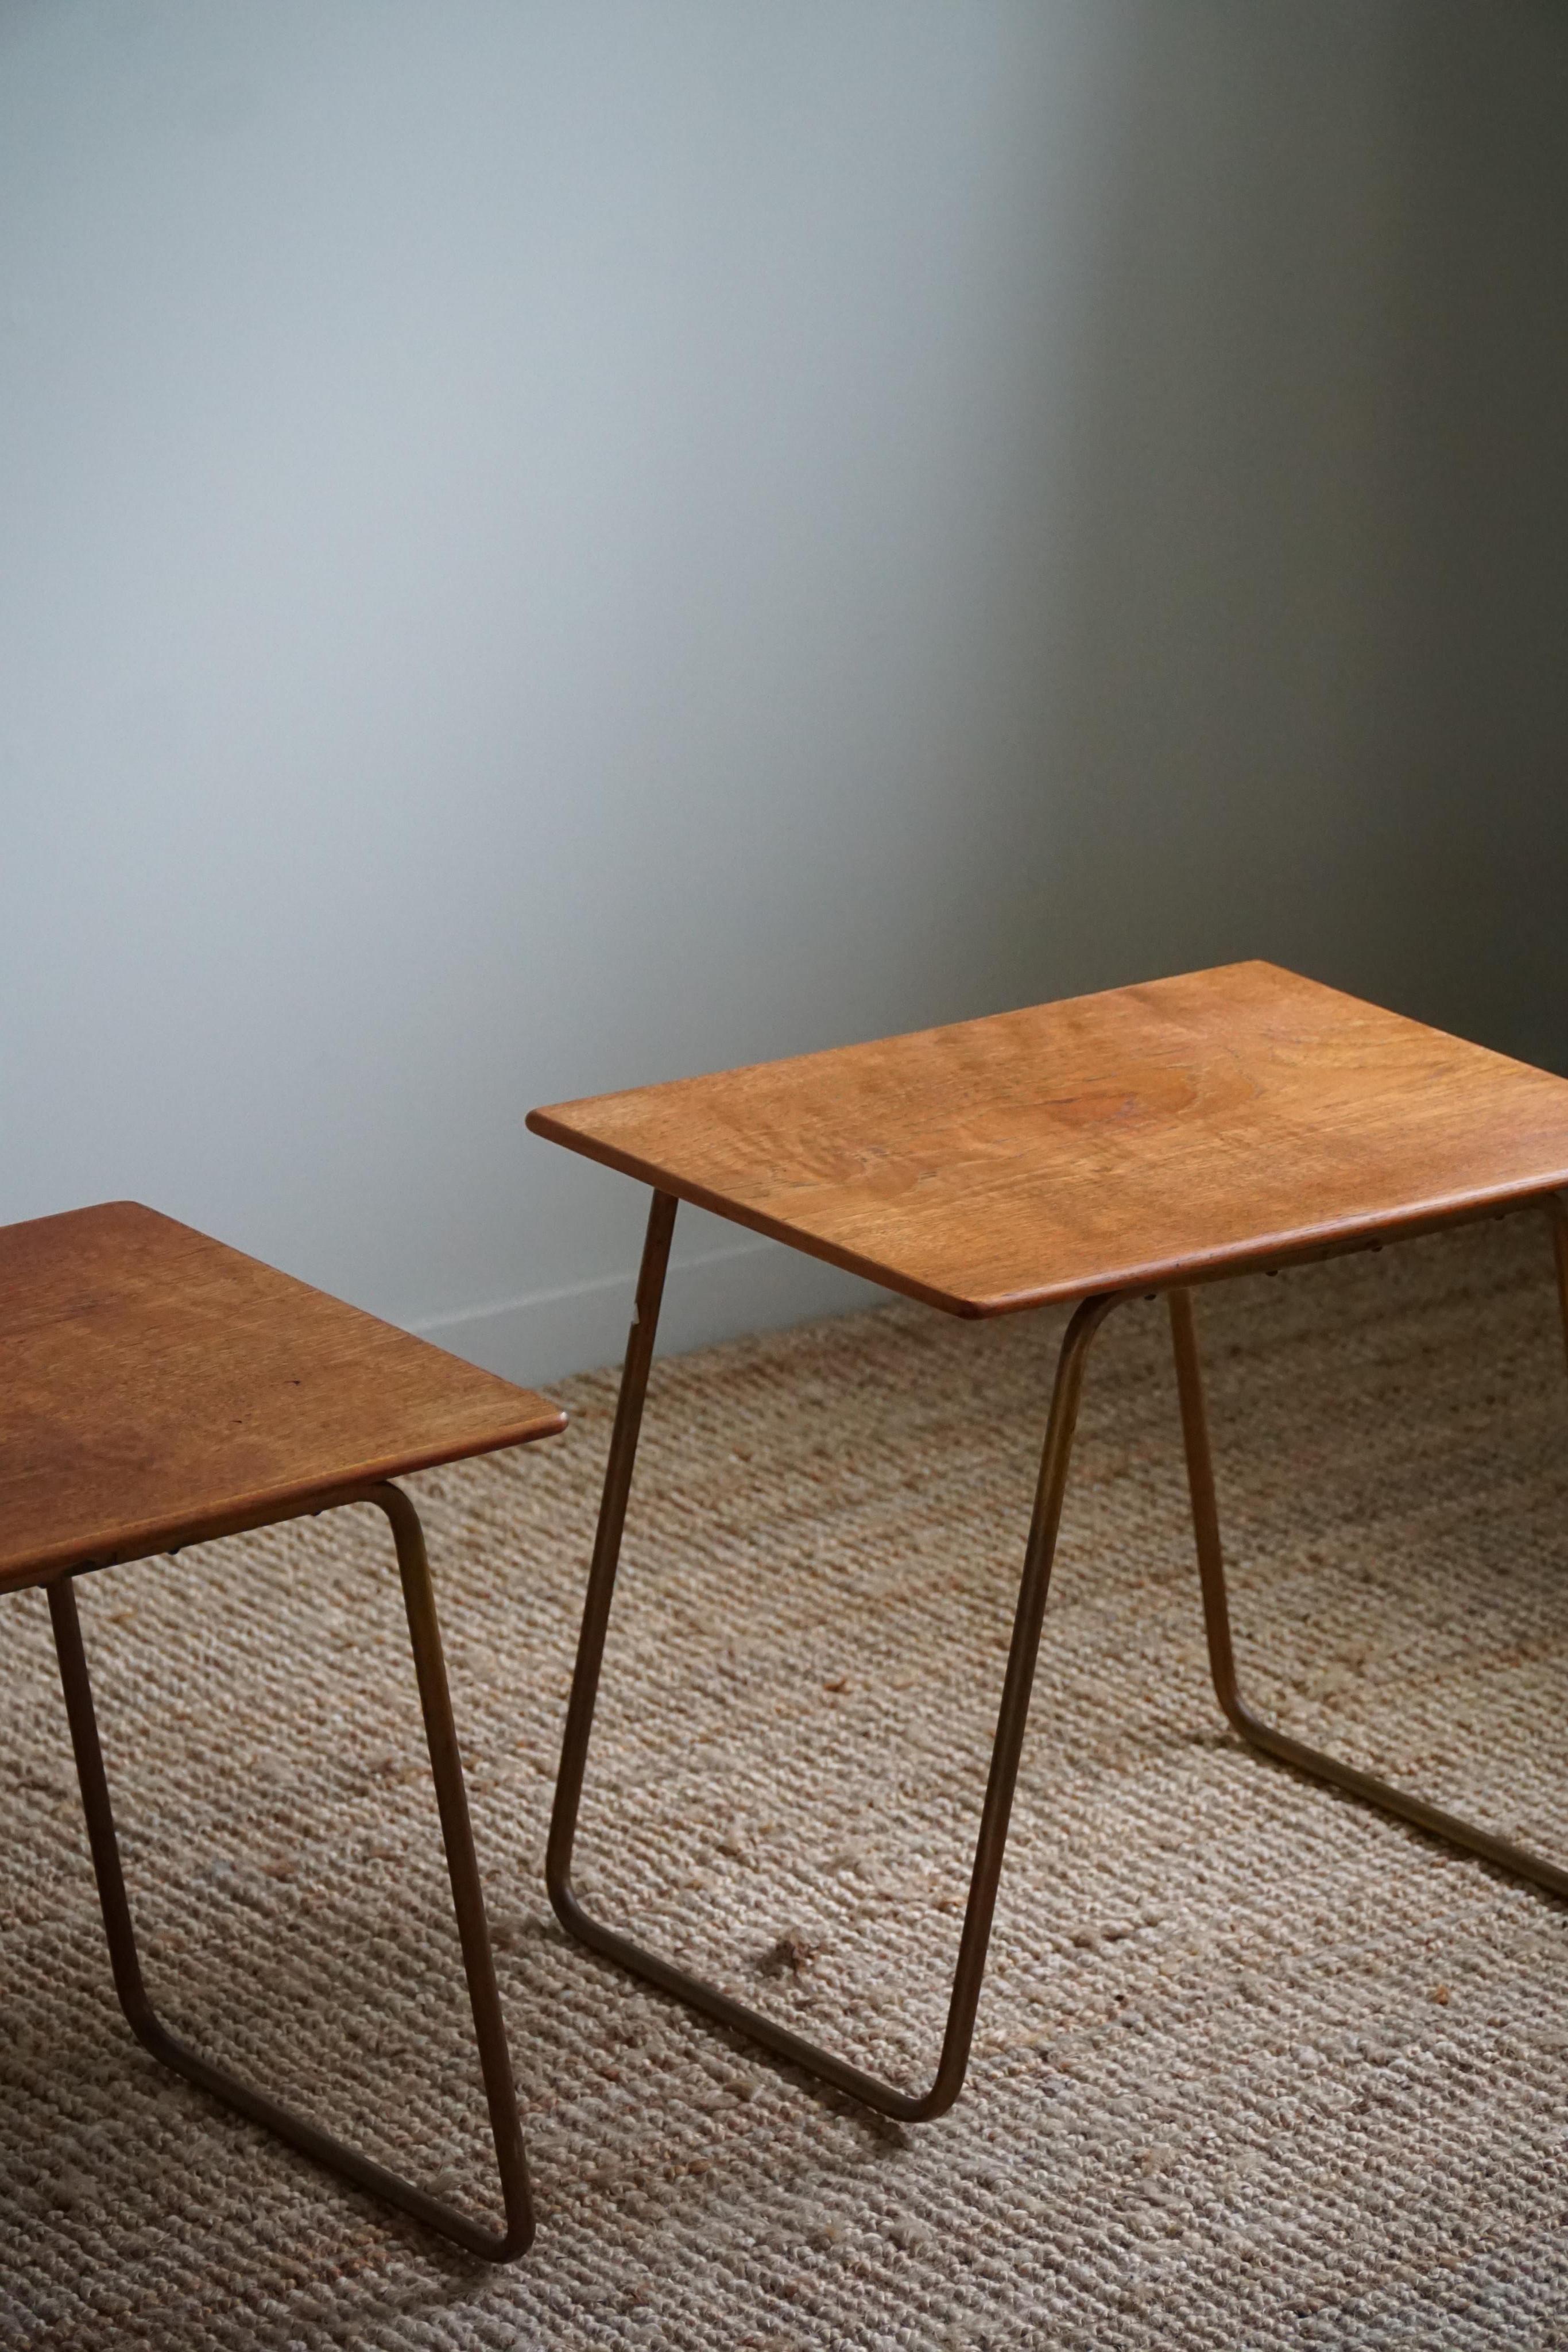 Pair of Side Tables in Teak and Steel, Danish Mid Century, 1960s For Sale 1